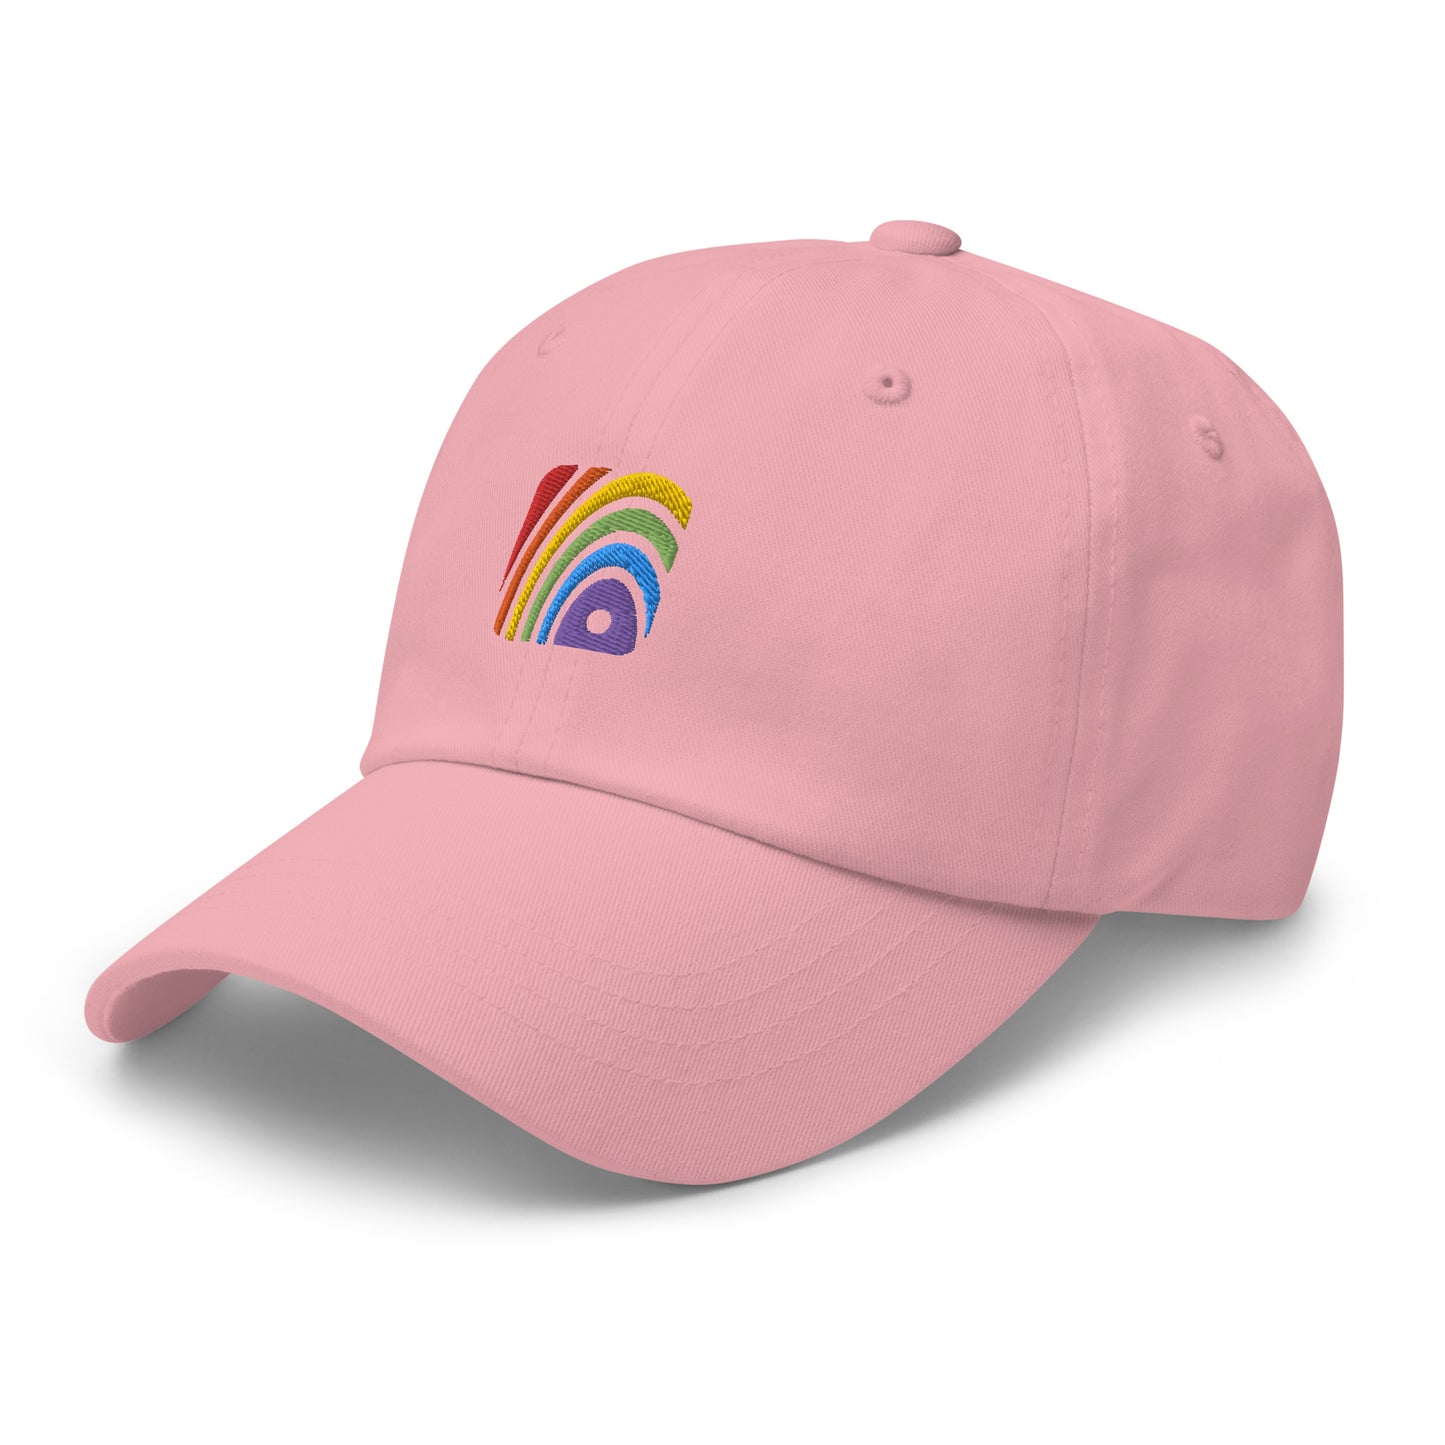 Pink baseball hat featuring rainbow design embroidery with a low profile, adjustable strap.